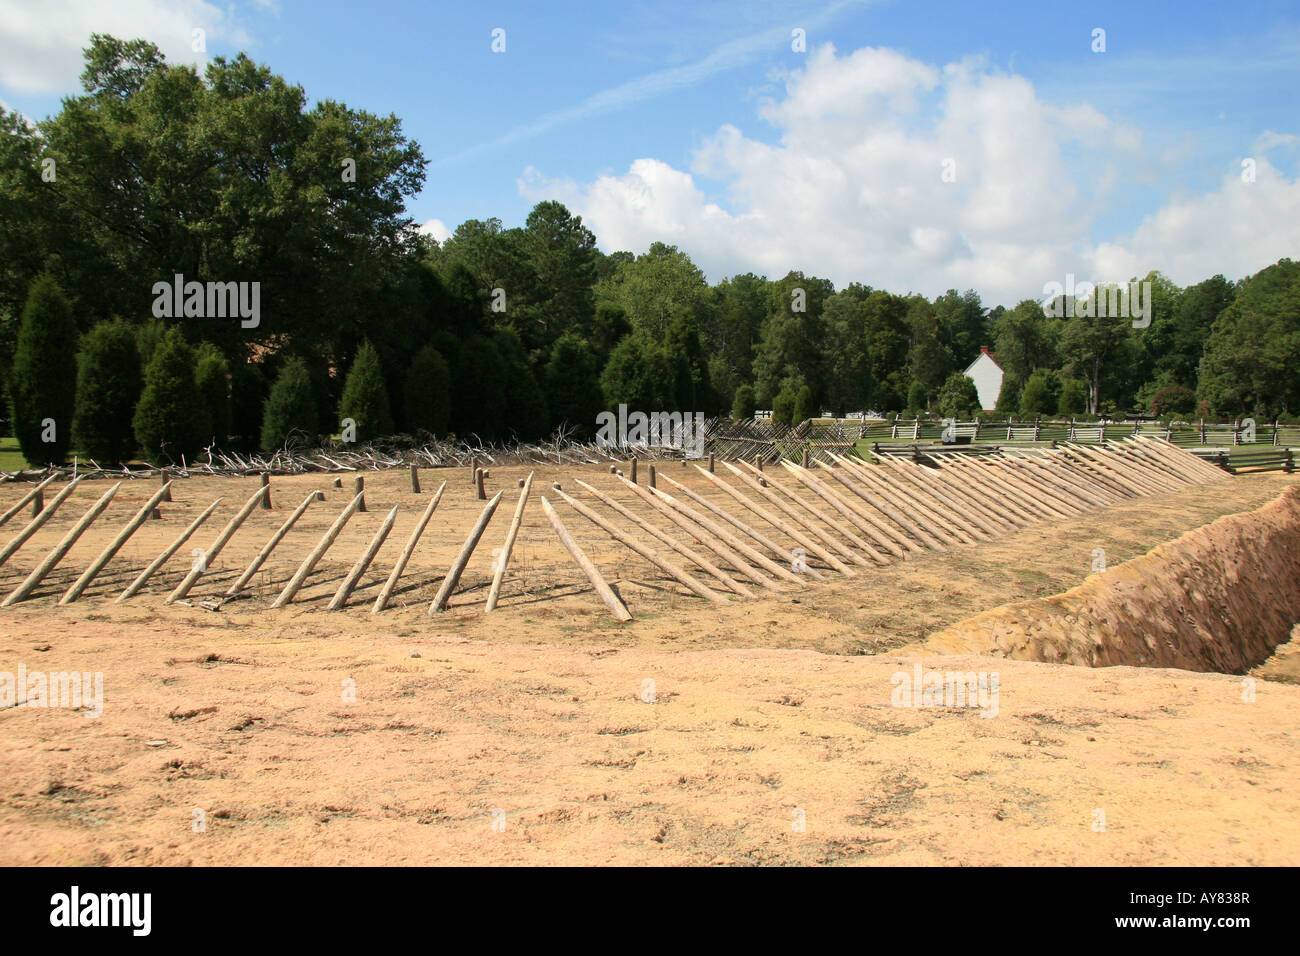 Reproductions of 'fraise' defensive fortifications at the Pamplin Historical Park, Petersburg. Stock Photo